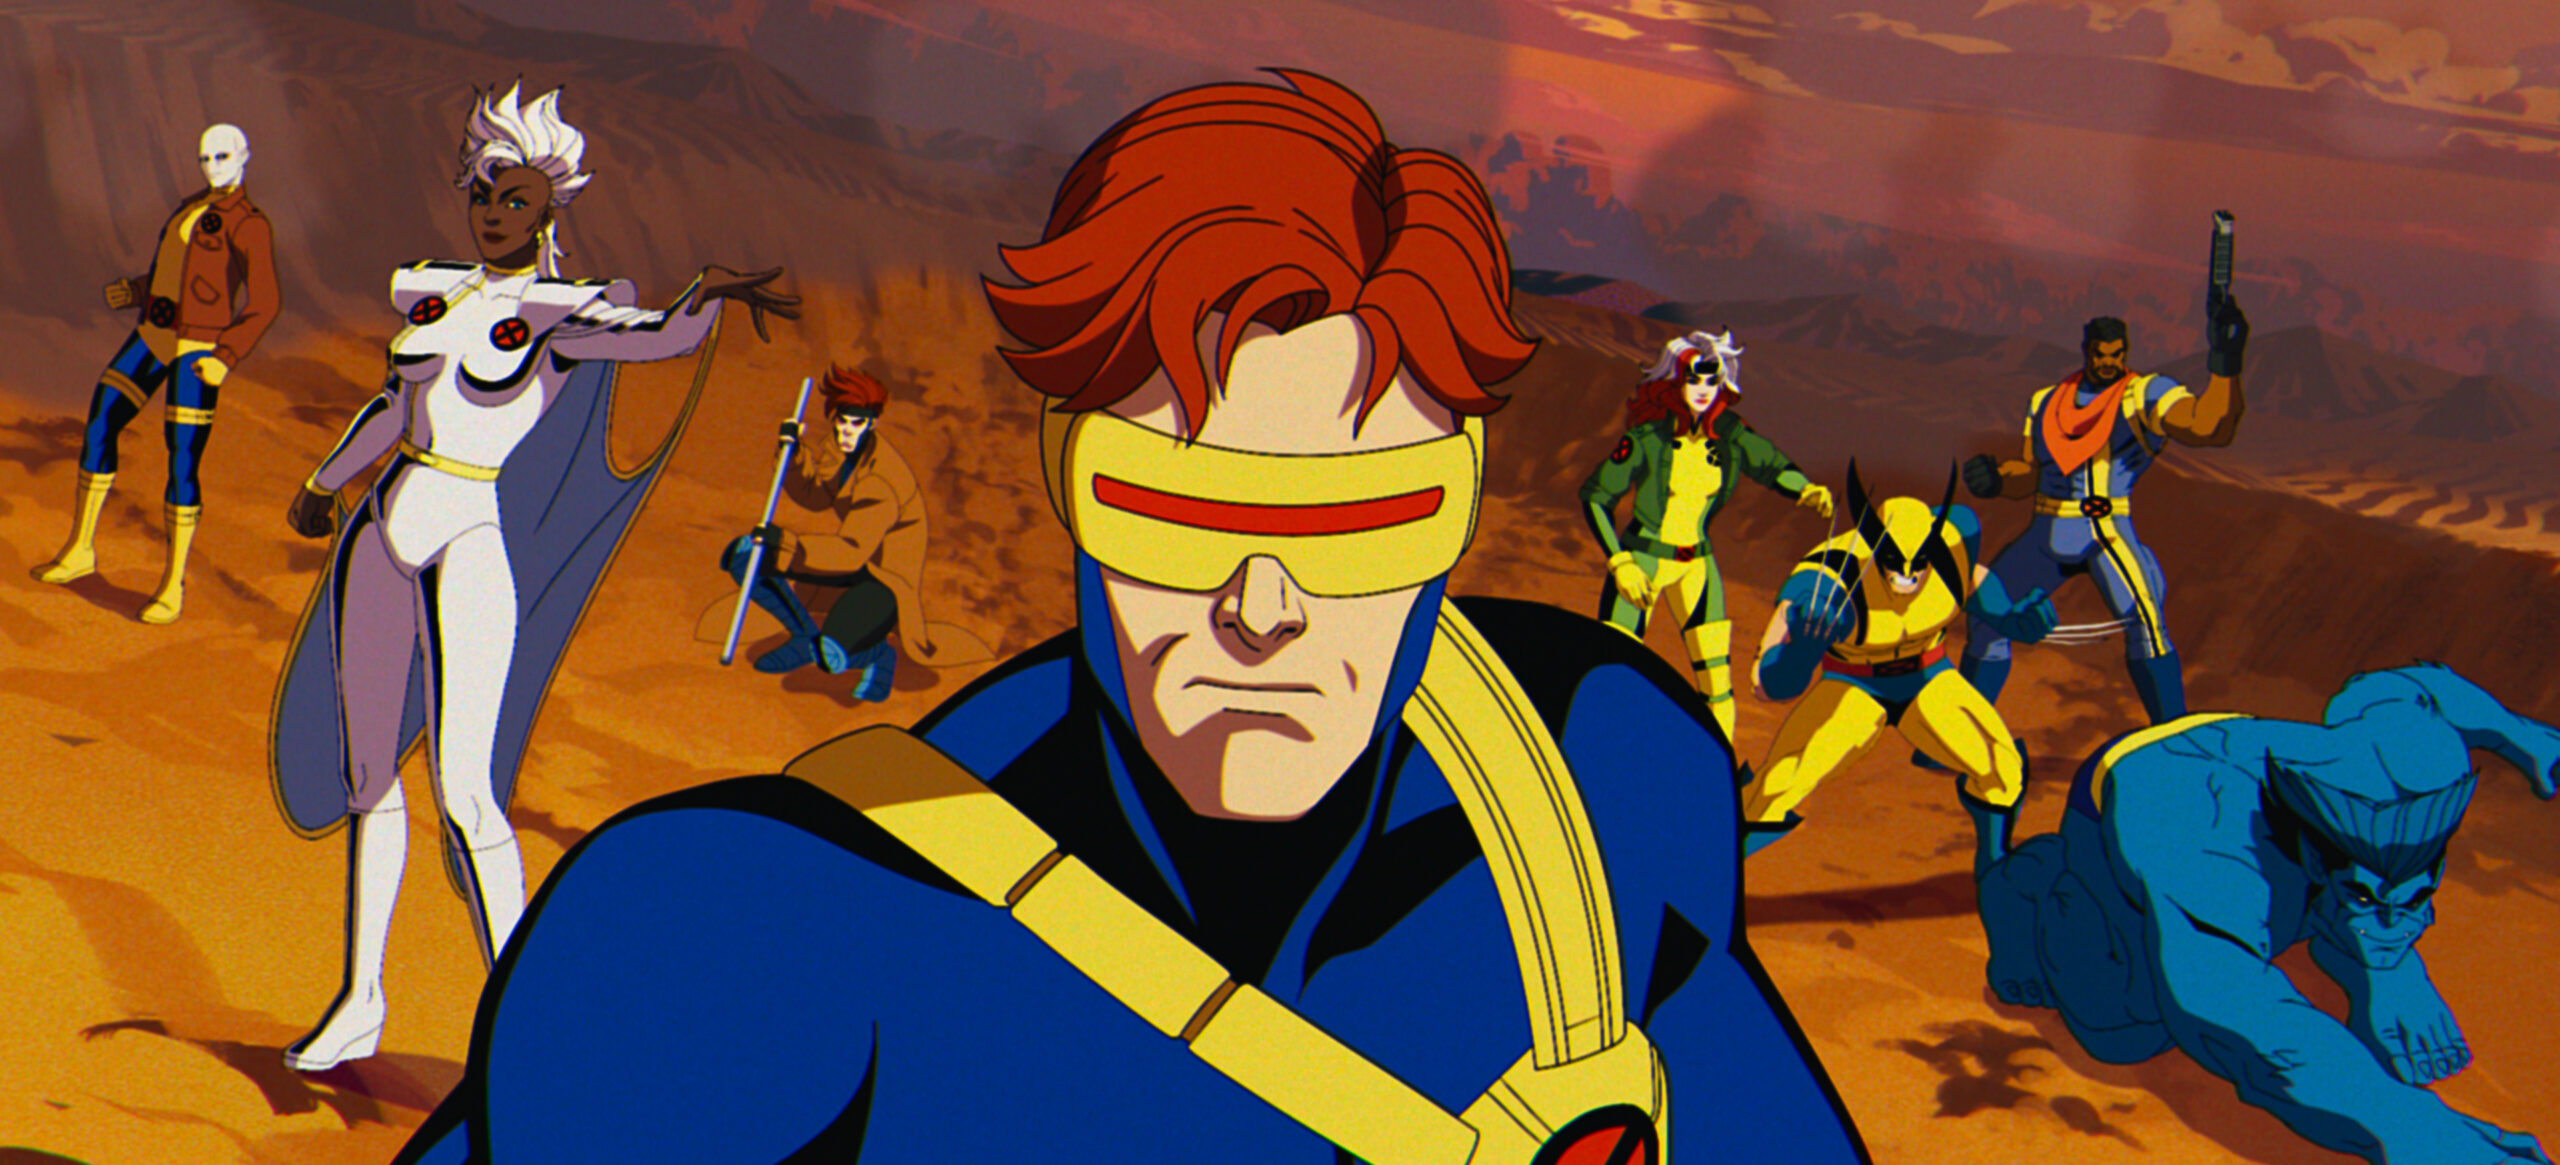 ‘X-Men ’97’ Trailer: The Legacy Mutants Are Back In Marvel’s Sequel To The Classic Animated Series